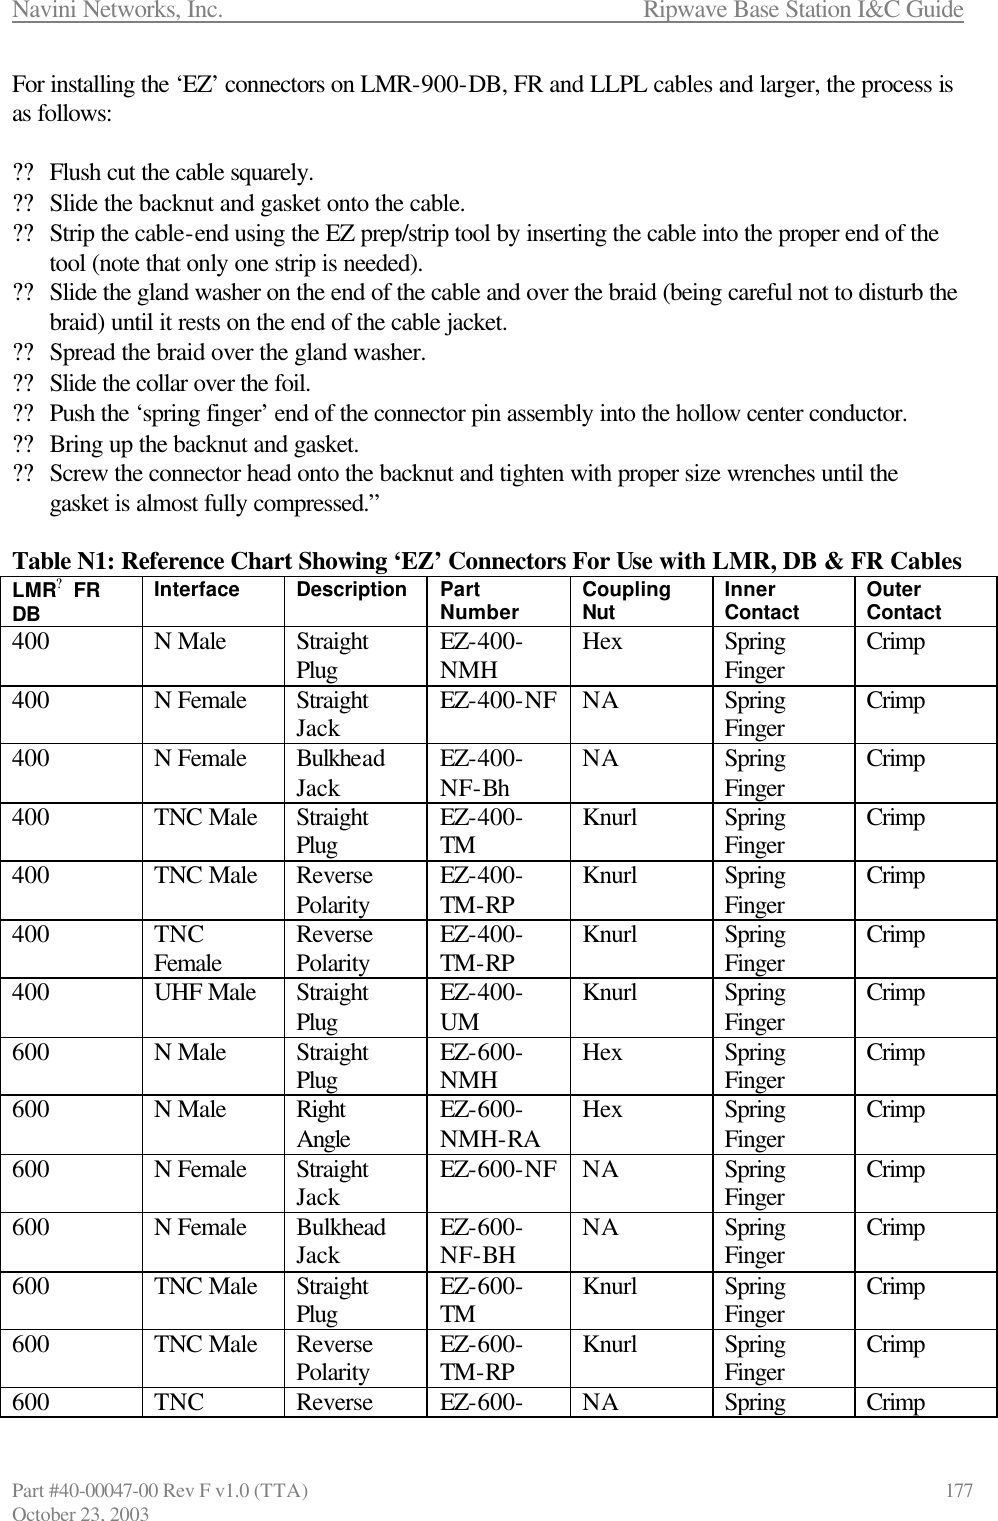 Navini Networks, Inc.                      Ripwave Base Station I&amp;C Guide Part #40-00047-00 Rev F v1.0 (TTA)                            177 October 23, 2003 For installing the ‘EZ’ connectors on LMR-900-DB, FR and LLPL cables and larger, the process is as follows:  ?? Flush cut the cable squarely. ?? Slide the backnut and gasket onto the cable. ?? Strip the cable-end using the EZ prep/strip tool by inserting the cable into the proper end of the tool (note that only one strip is needed). ?? Slide the gland washer on the end of the cable and over the braid (being careful not to disturb the braid) until it rests on the end of the cable jacket. ?? Spread the braid over the gland washer. ?? Slide the collar over the foil. ?? Push the ‘spring finger’ end of the connector pin assembly into the hollow center conductor. ?? Bring up the backnut and gasket. ?? Screw the connector head onto the backnut and tighten with proper size wrenches until the gasket is almost fully compressed.”  Table N1: Reference Chart Showing ‘EZ’ Connectors For Use with LMR, DB &amp; FR Cables LMR? FR DB Interface Description Part Number Coupling Nut Inner Contact Outer Contact 400  N Male Straight Plug EZ-400-NMH Hex Spring Finger Crimp 400  N Female Straight Jack EZ-400-NF NA Spring Finger Crimp 400  N Female Bulkhead Jack EZ-400-NF-Bh NA Spring Finger Crimp 400  TNC Male Straight Plug EZ-400-TM Knurl Spring Finger Crimp 400  TNC Male Reverse Polarity EZ-400-TM-RP Knurl Spring Finger Crimp 400  TNC Female Reverse Polarity EZ-400-TM-RP Knurl Spring Finger Crimp 400  UHF Male Straight Plug EZ-400-UM Knurl Spring Finger Crimp 600  N Male Straight Plug EZ-600-NMH Hex Spring Finger Crimp 600  N Male Right Angle EZ-600-NMH-RA Hex Spring Finger Crimp 600  N Female Straight Jack EZ-600-NF NA Spring Finger Crimp 600  N Female Bulkhead Jack EZ-600-NF-BH NA Spring Finger Crimp 600  TNC Male Straight Plug EZ-600-TM Knurl Spring Finger Crimp 600  TNC Male Reverse Polarity EZ-600-TM-RP Knurl Spring Finger Crimp 600 TNC Reverse EZ-600-NA Spring Crimp 